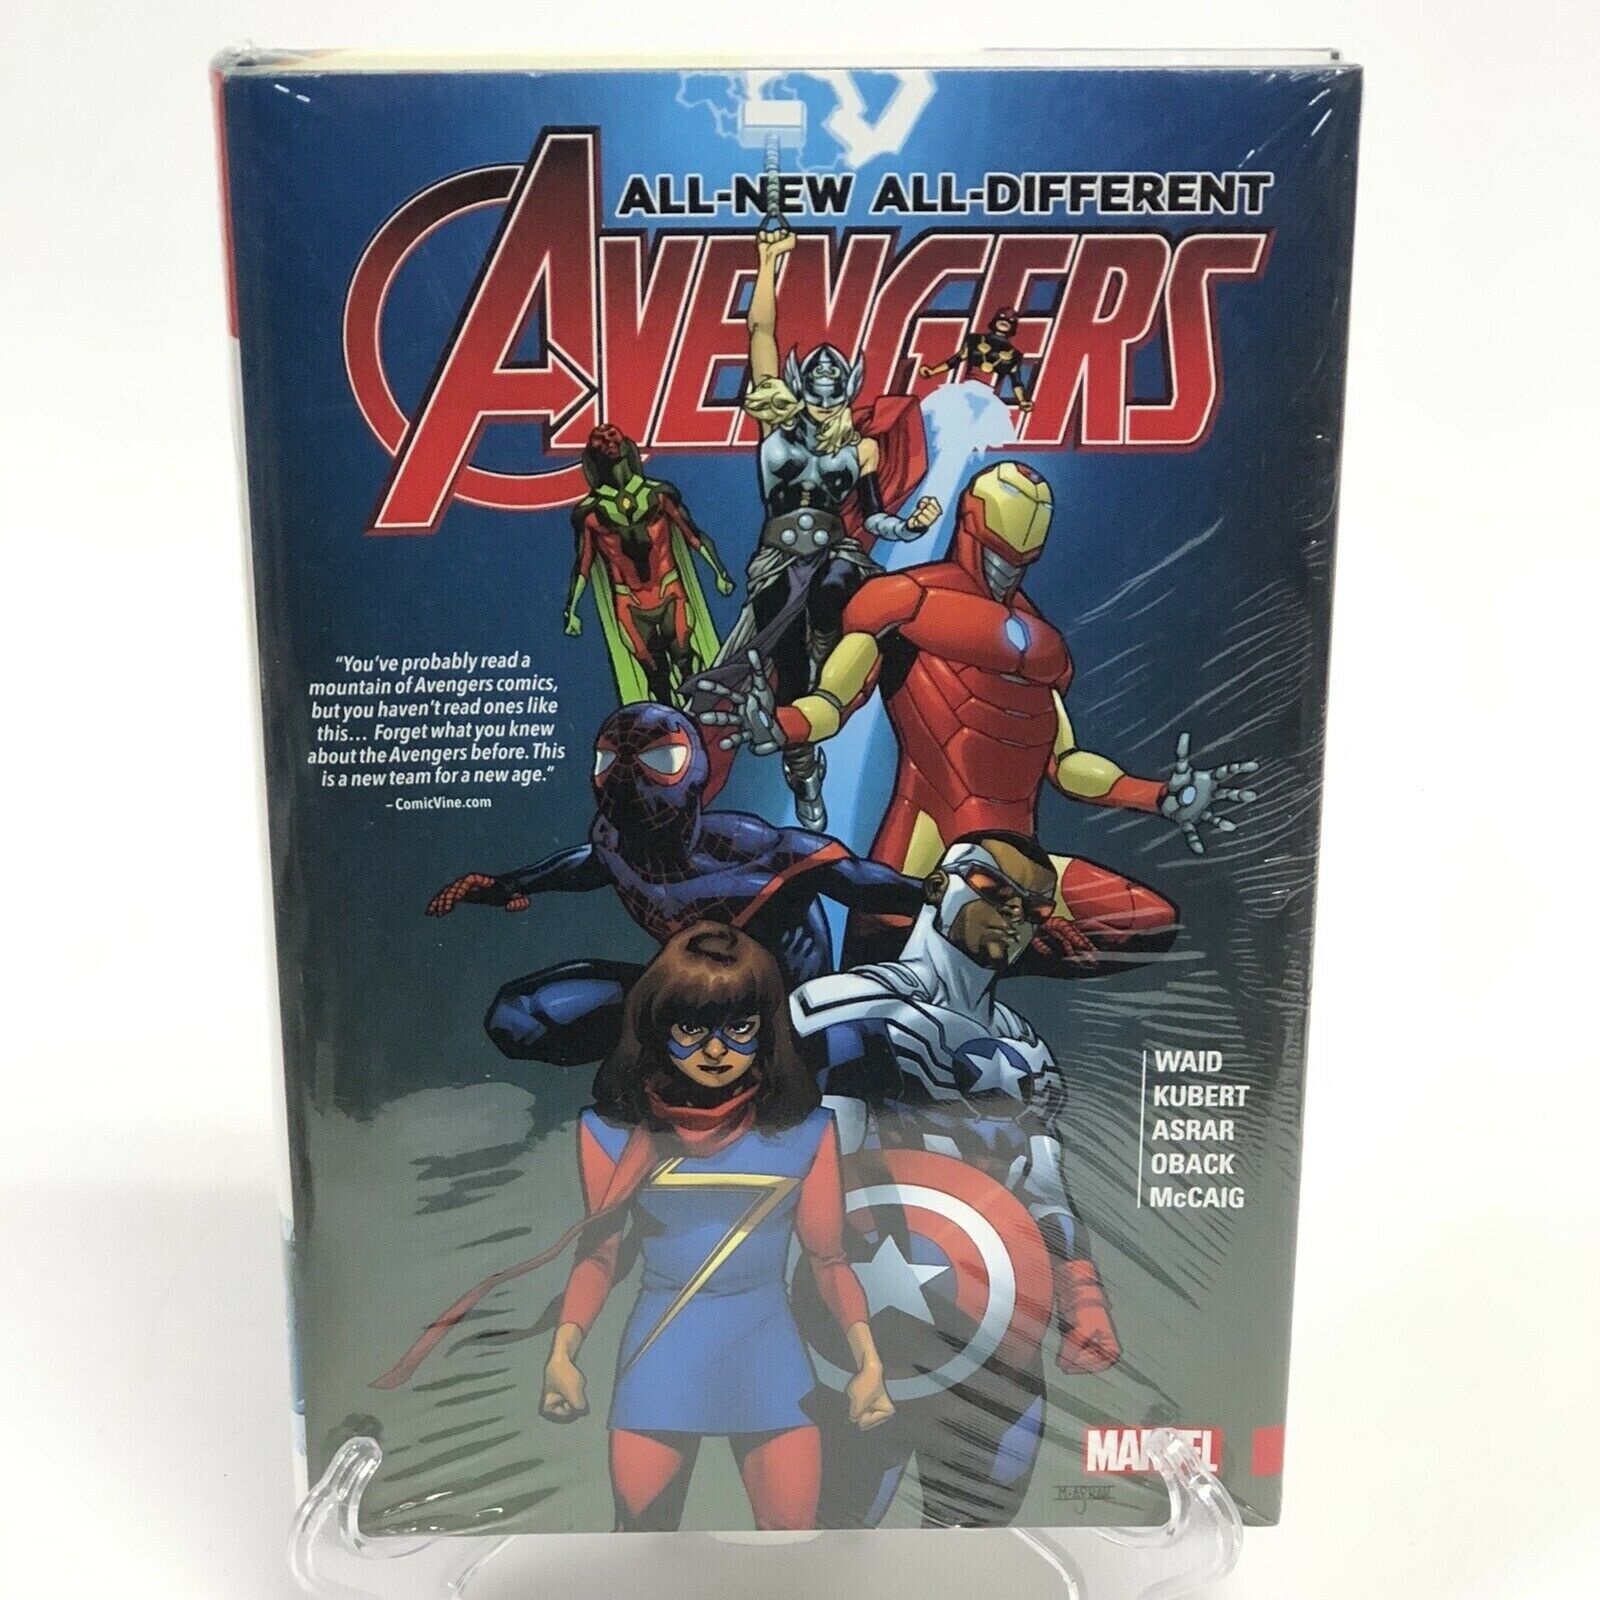 All-New All-Different Avengers Volume 1 New Marvel Comics HC Miles Morales